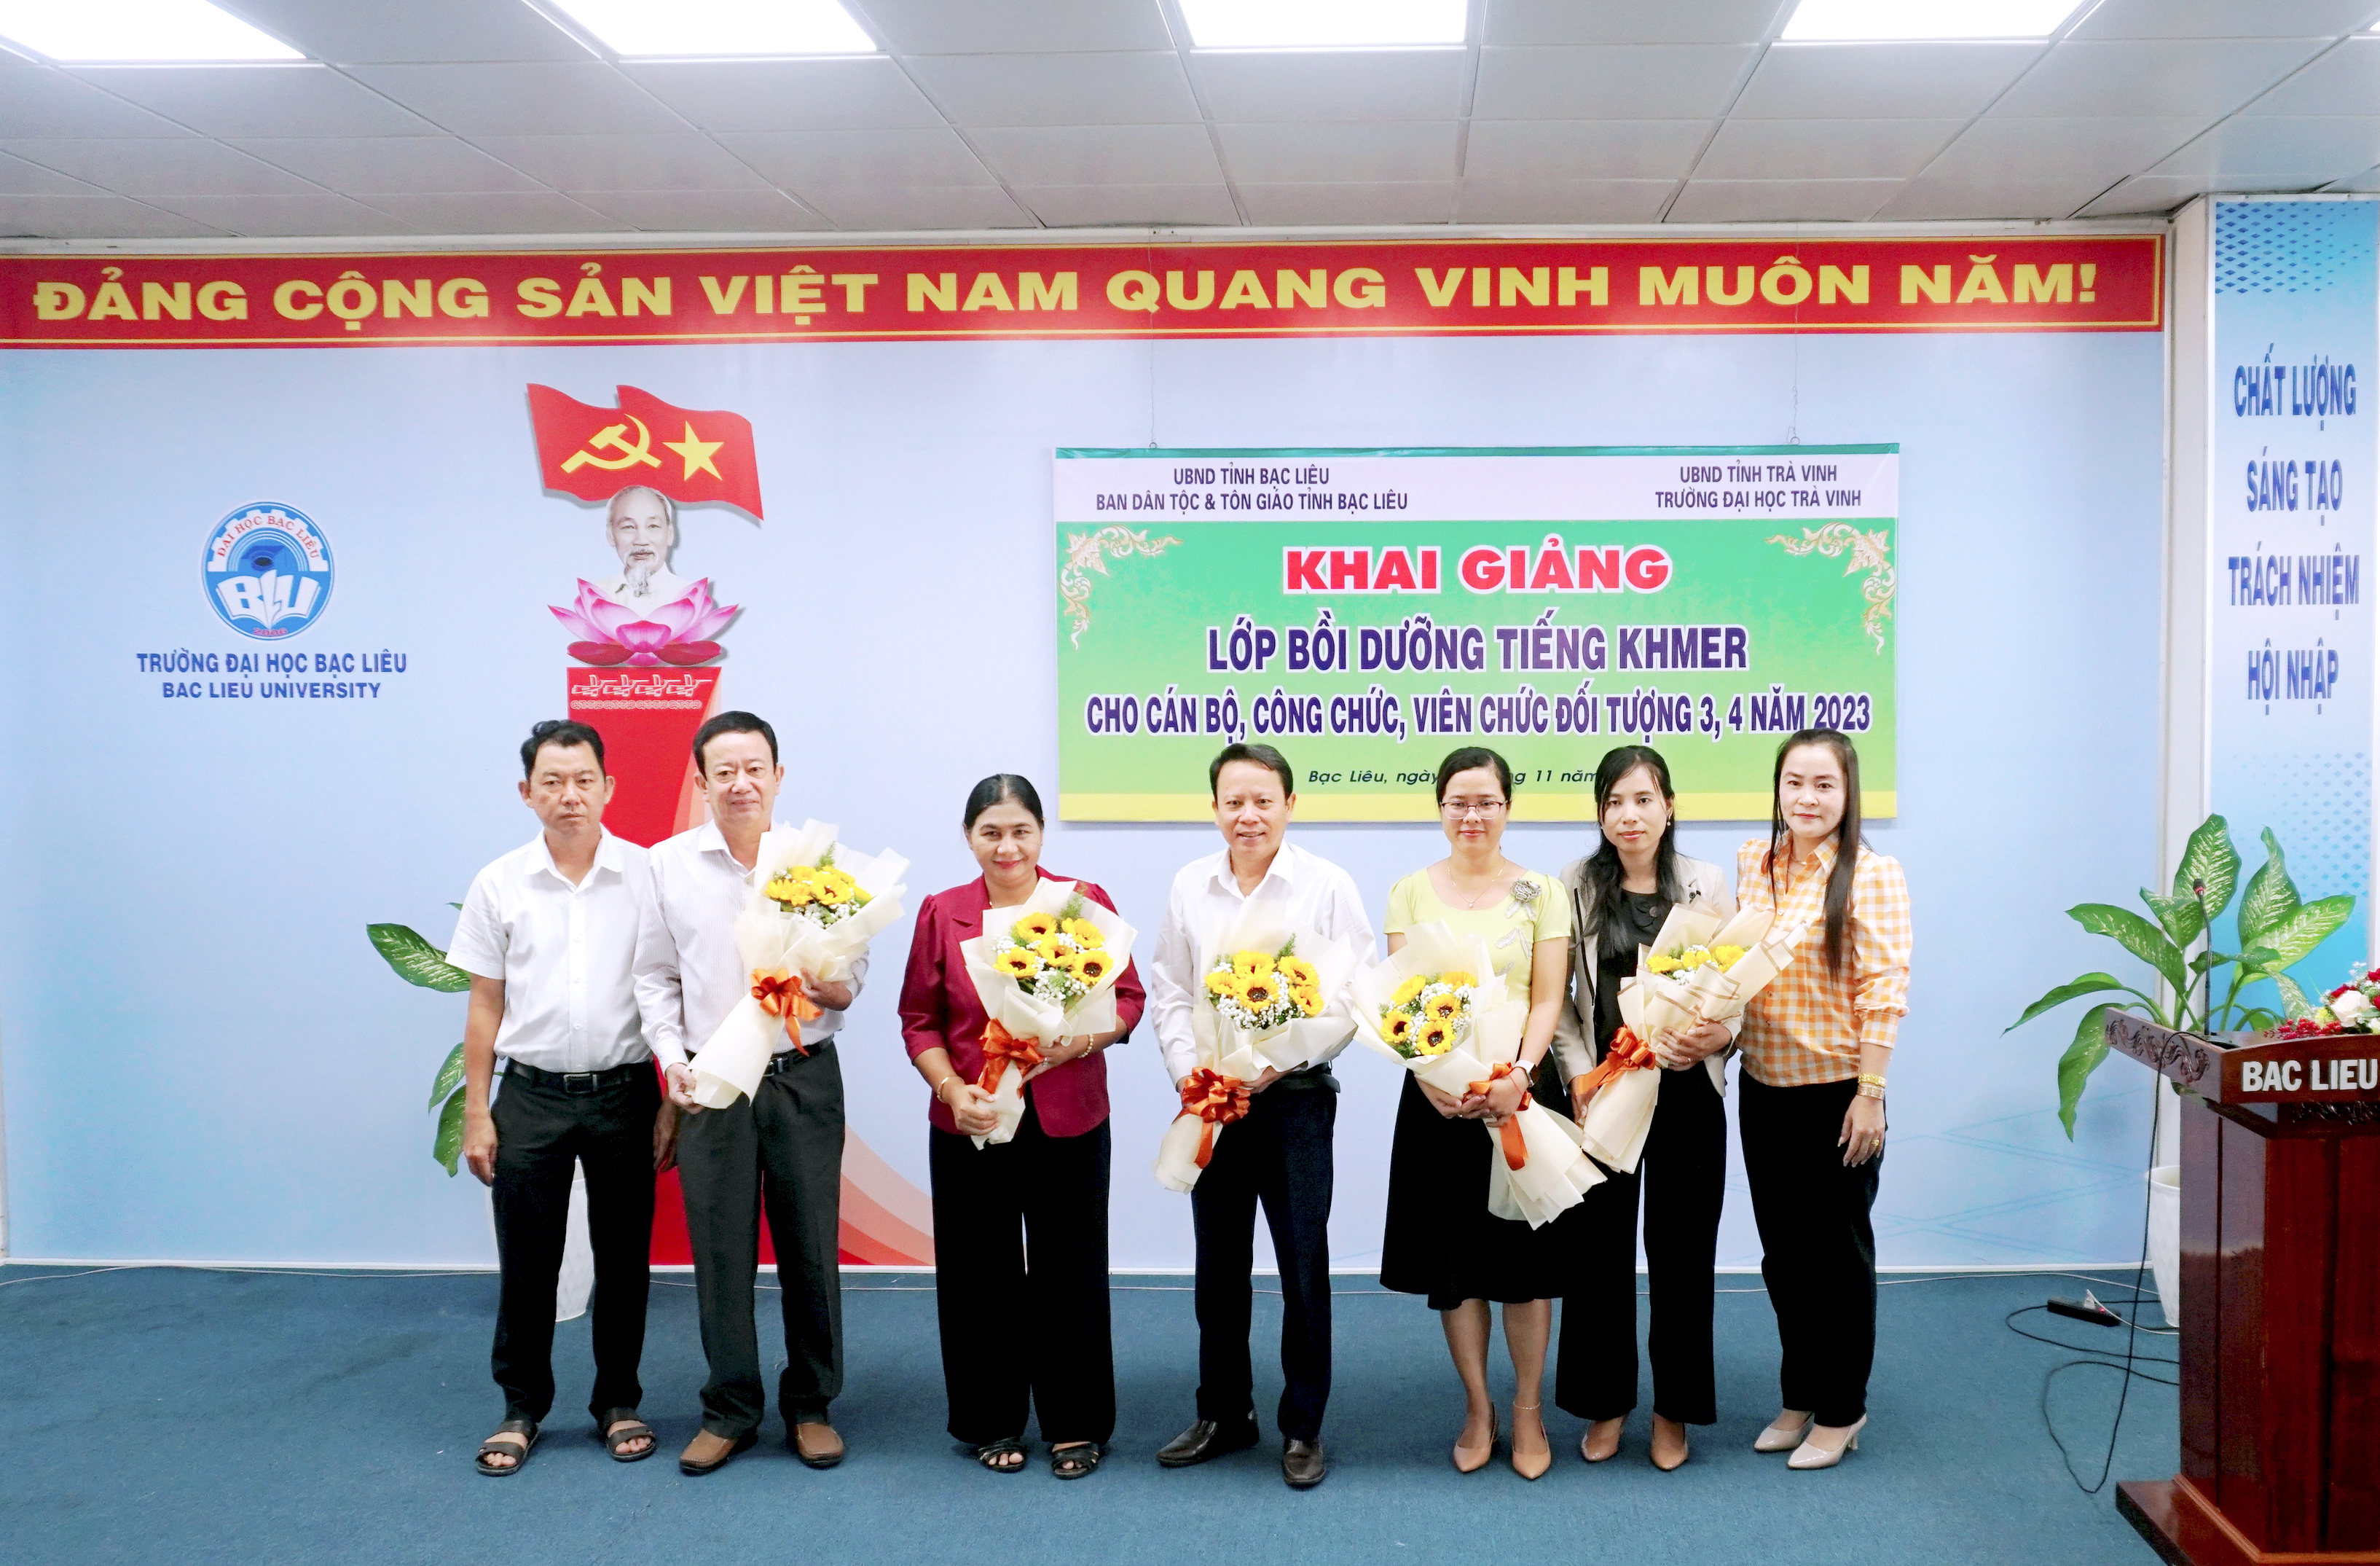 Bac Lieu and Tra Vinh University collaborated to organize the Opening Ceremony of the Khmer (Cambodian) Language Training class for local government jobholders’ type 3 and 4 in the year 2023.